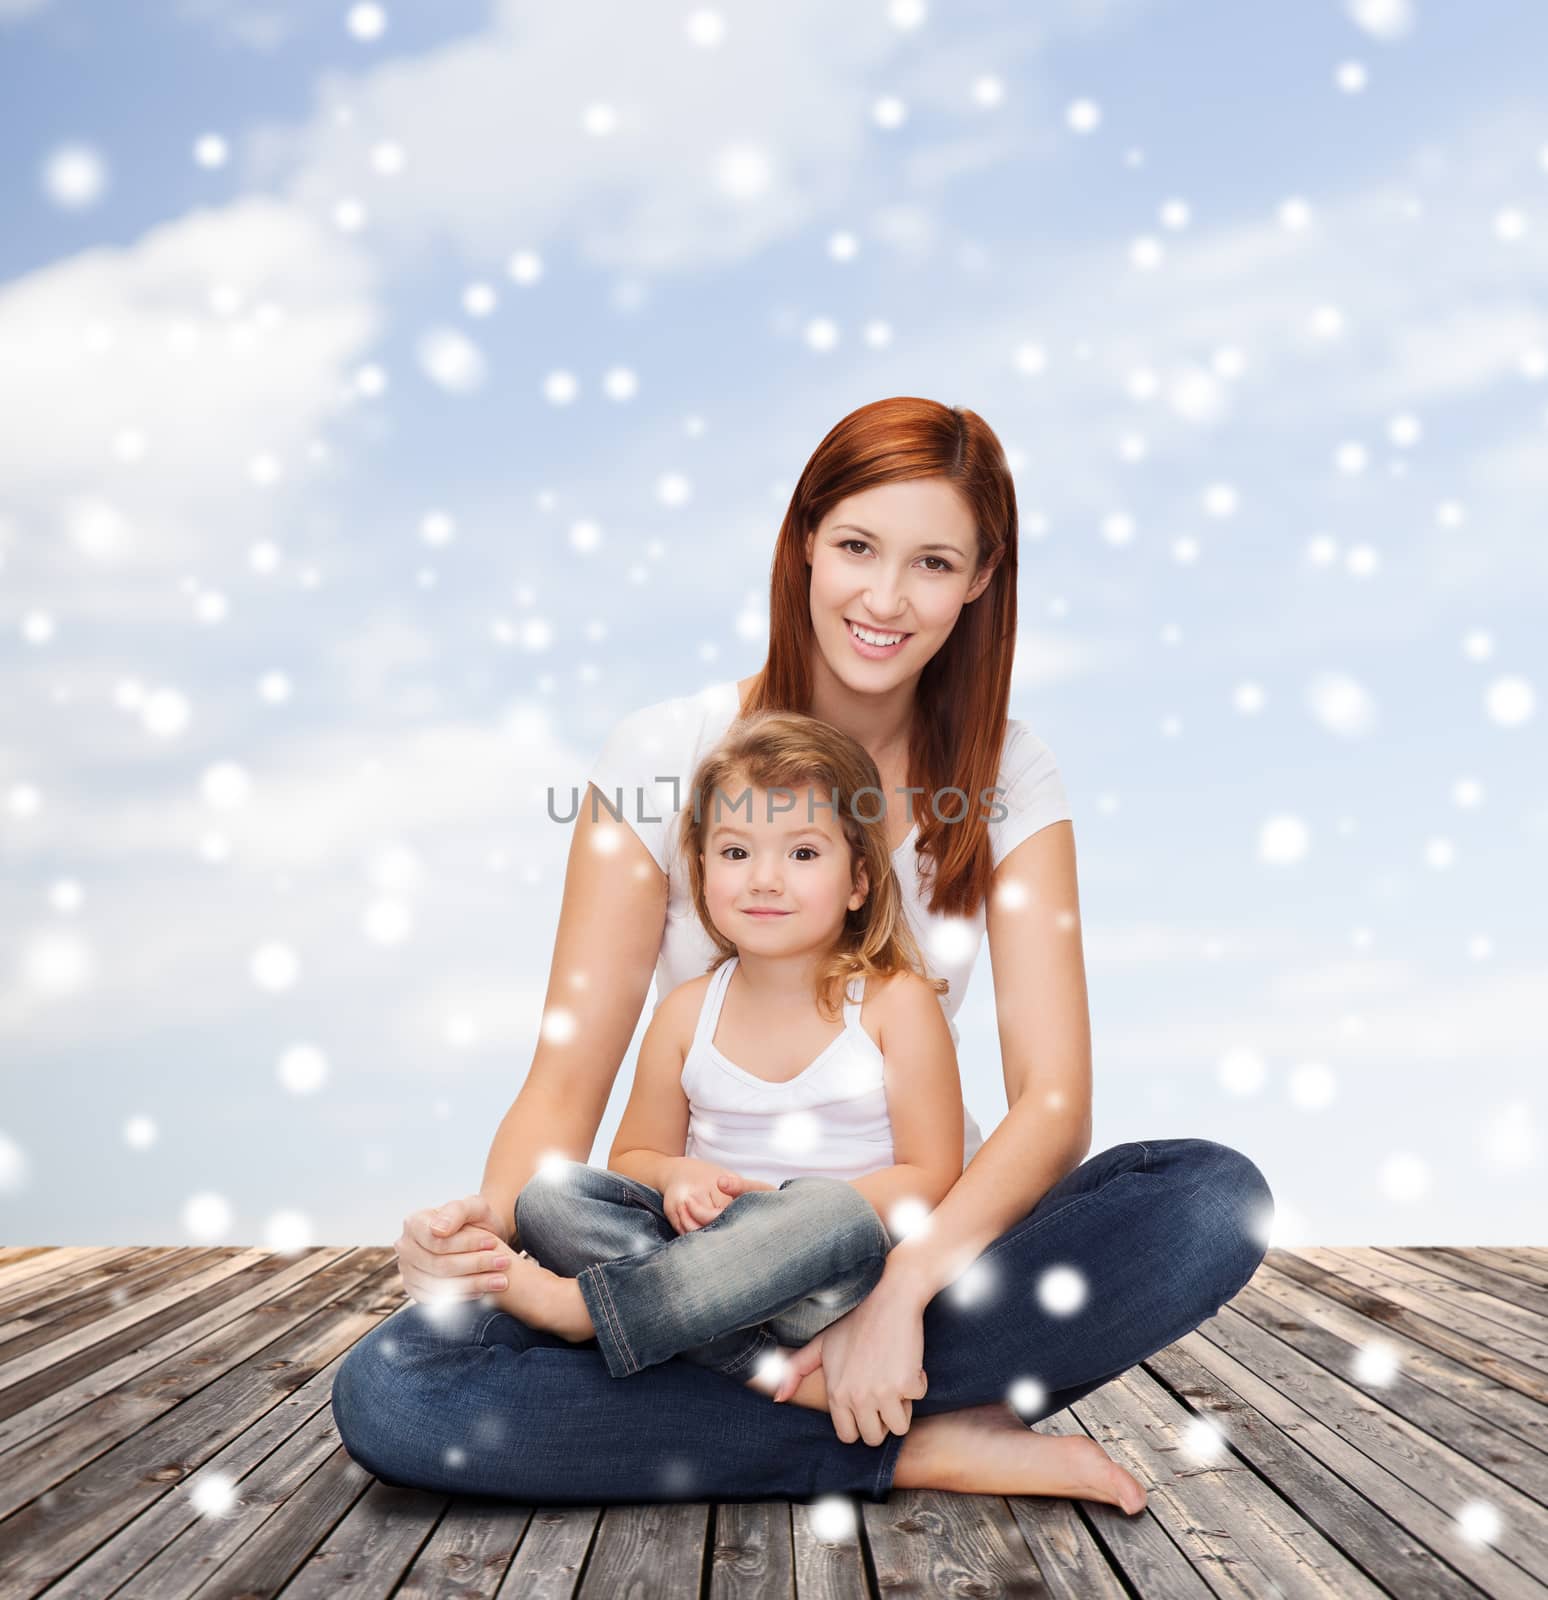 childhood, parenting and people concept - happy mother with little girl over wooden floor and blue sky background